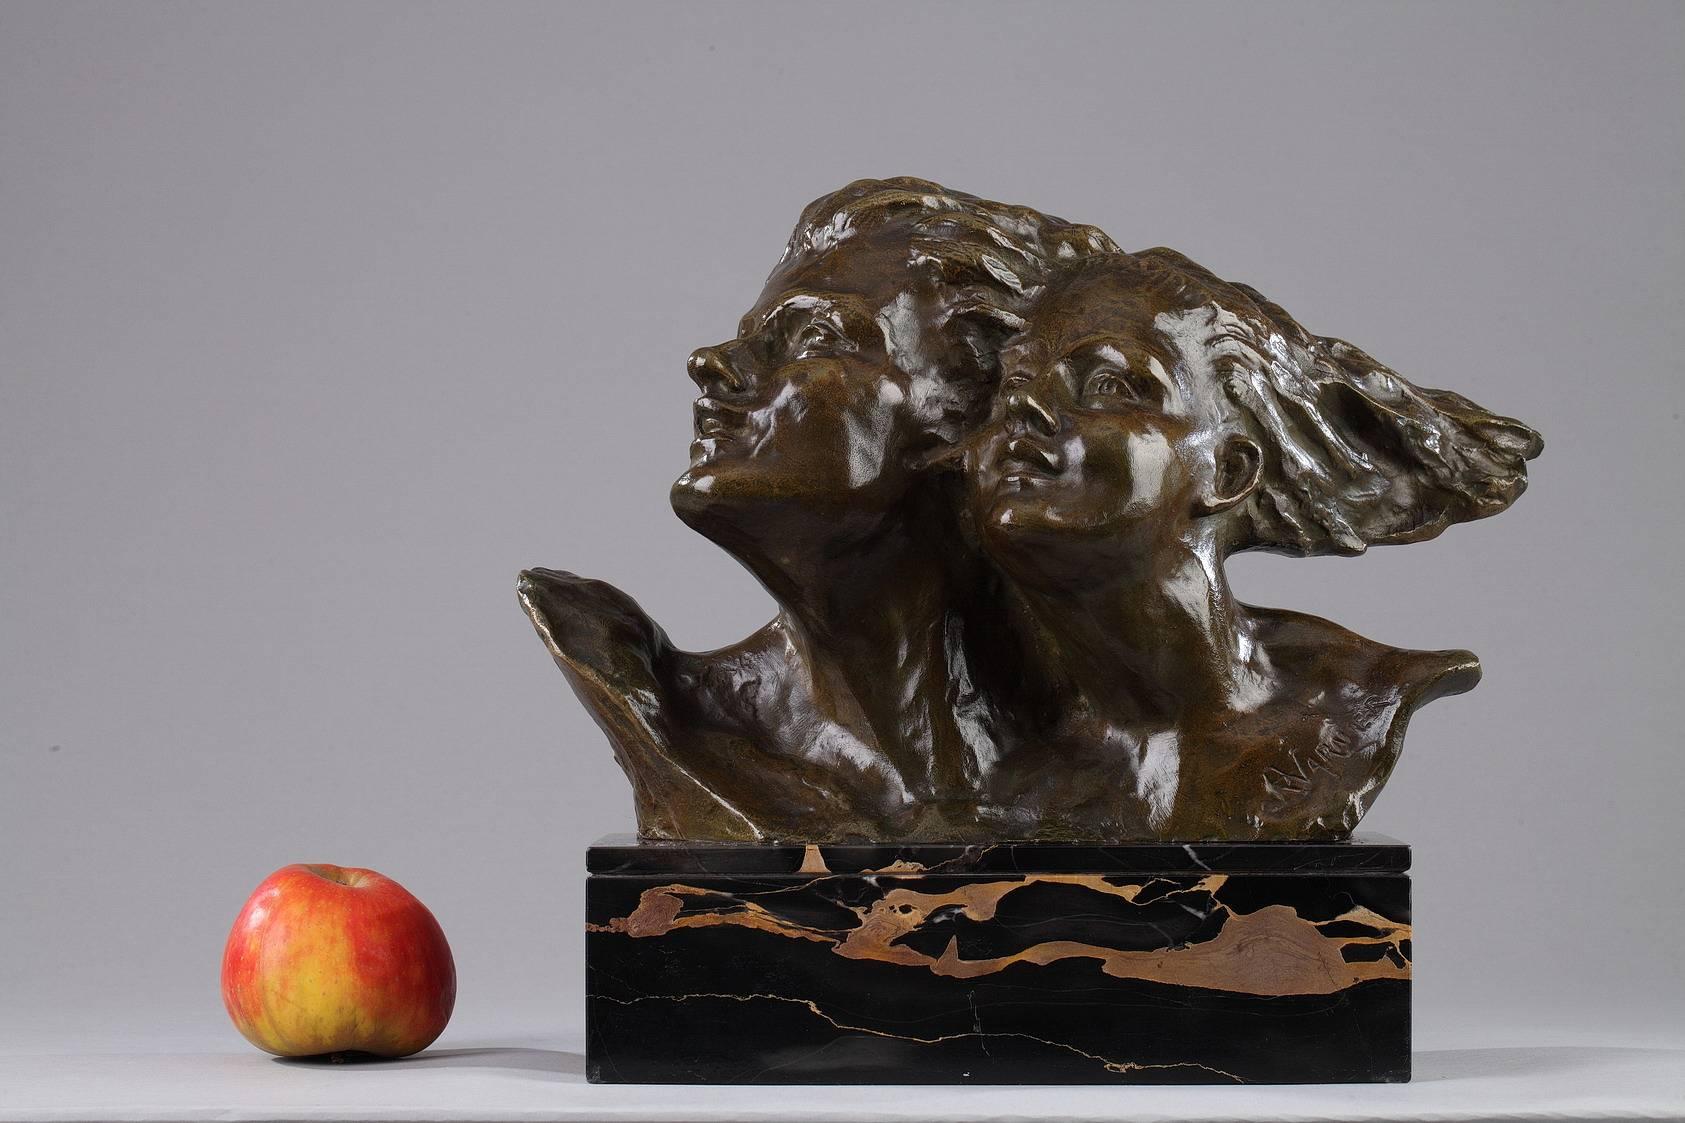 Bronze sculpture with nuanced, brown patina by René André Varnier (active during the early 20th century). It features a couple in love with their hair flowing behind them as the face the wind together. It is set on a Portoro marble base, a type of